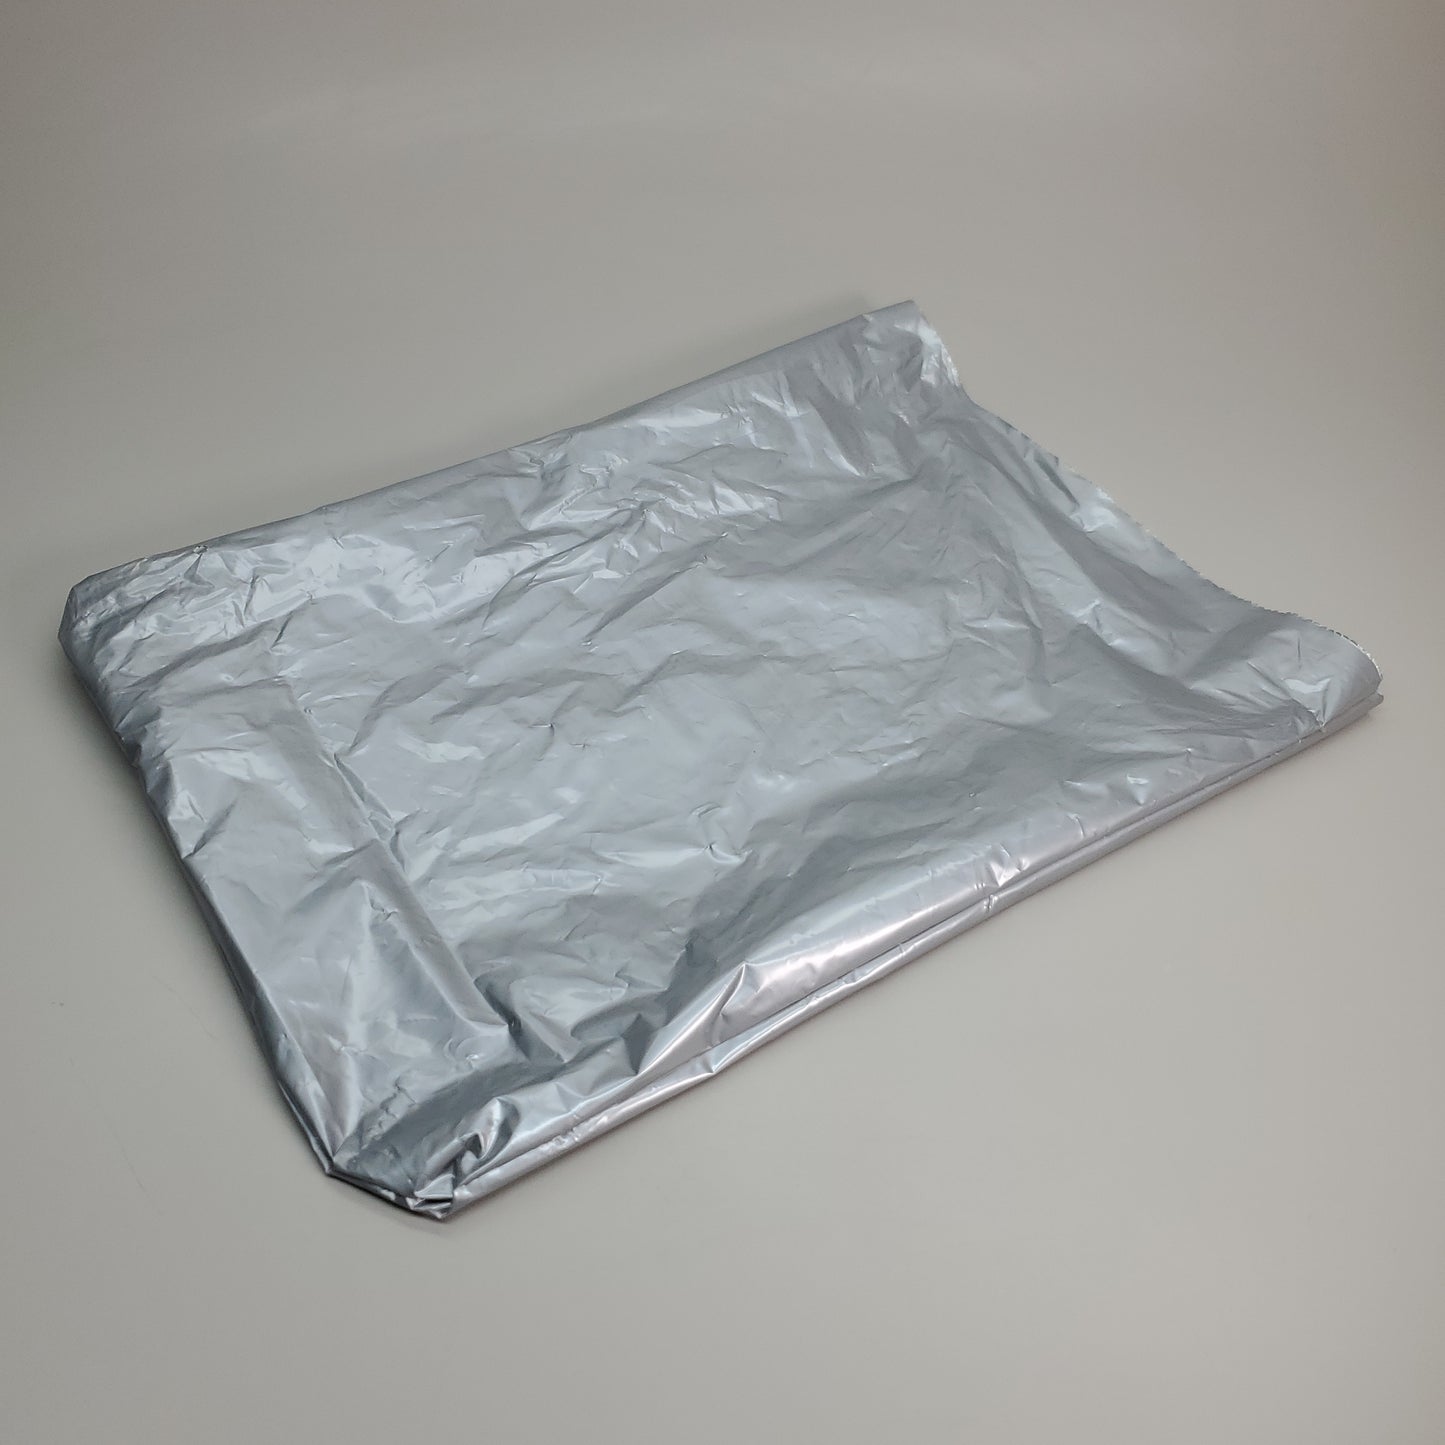 Box of 750 Autobags Fanfold Poly Bags for Shipping and Packaging 17"X23.5" HYD1723 (New Other Adv. HydroJug)